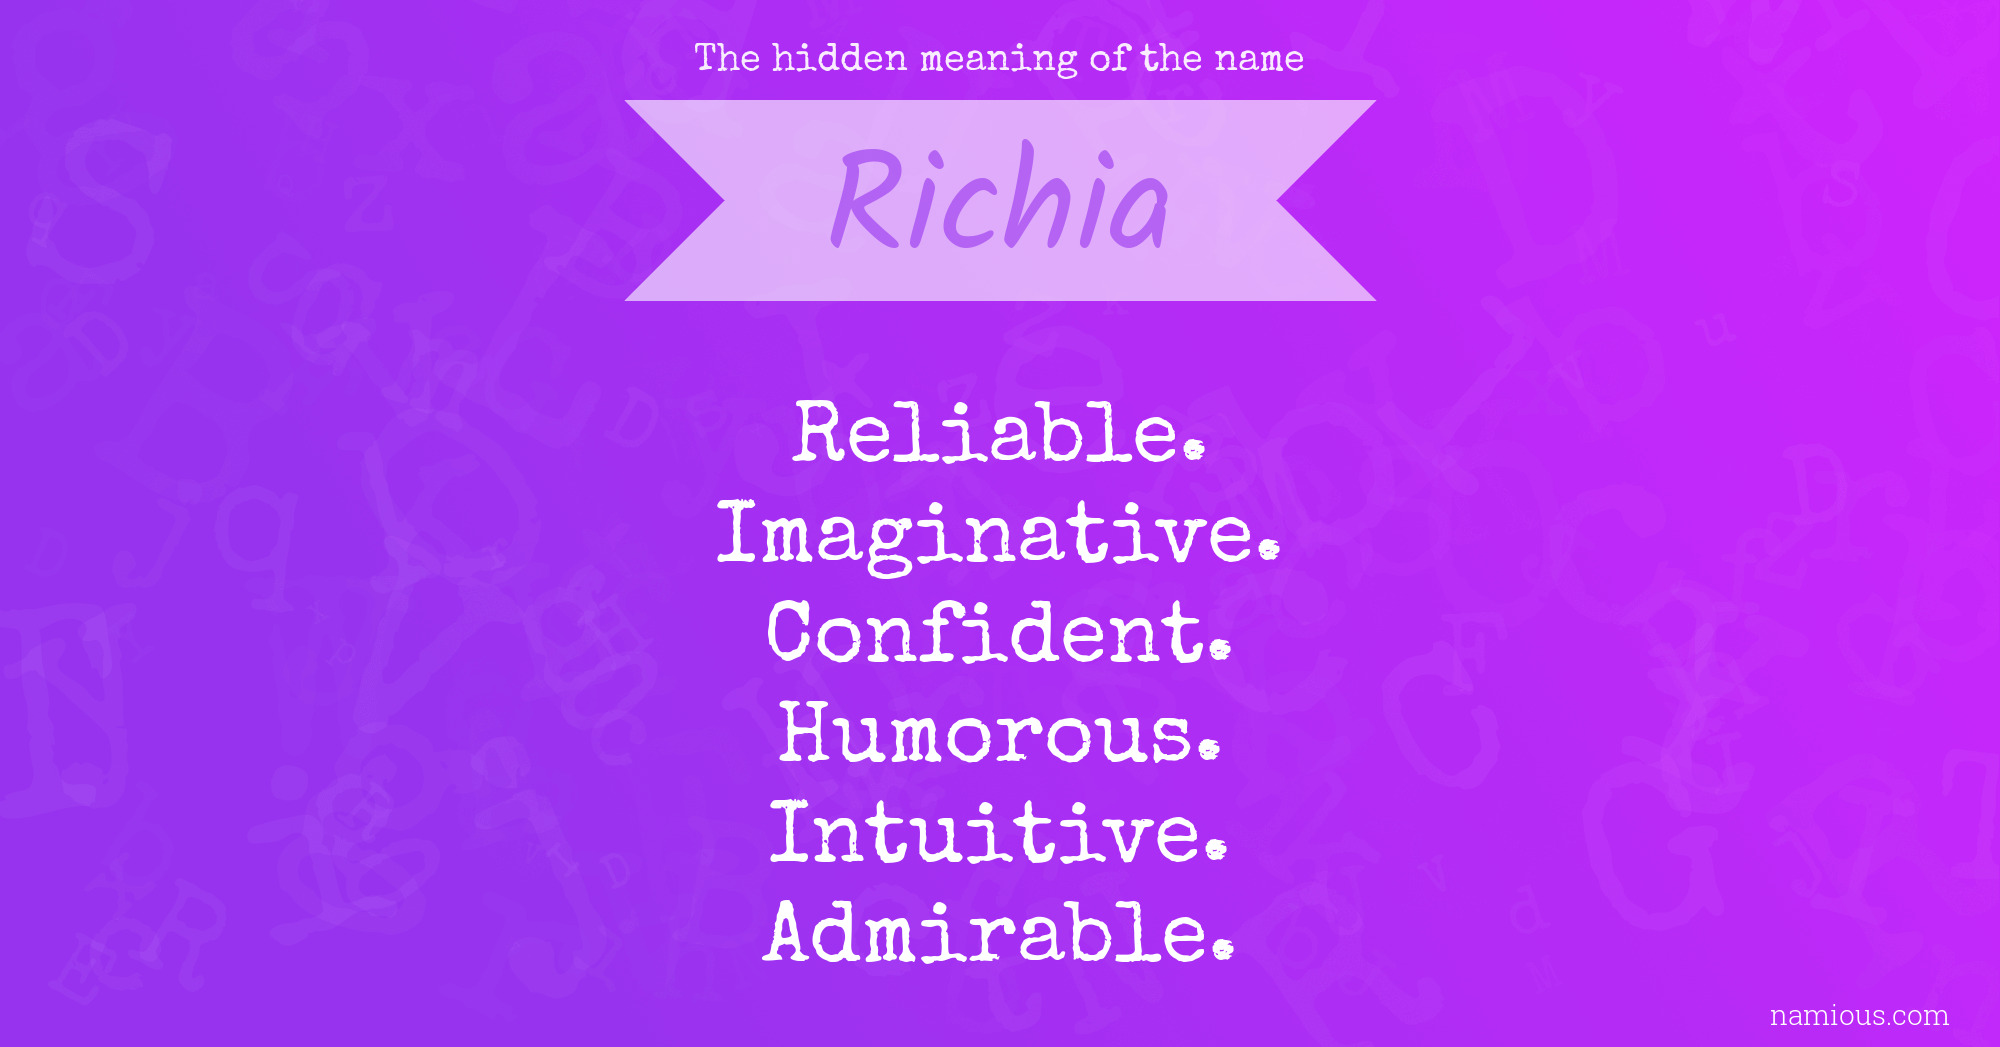 The hidden meaning of the name Richia